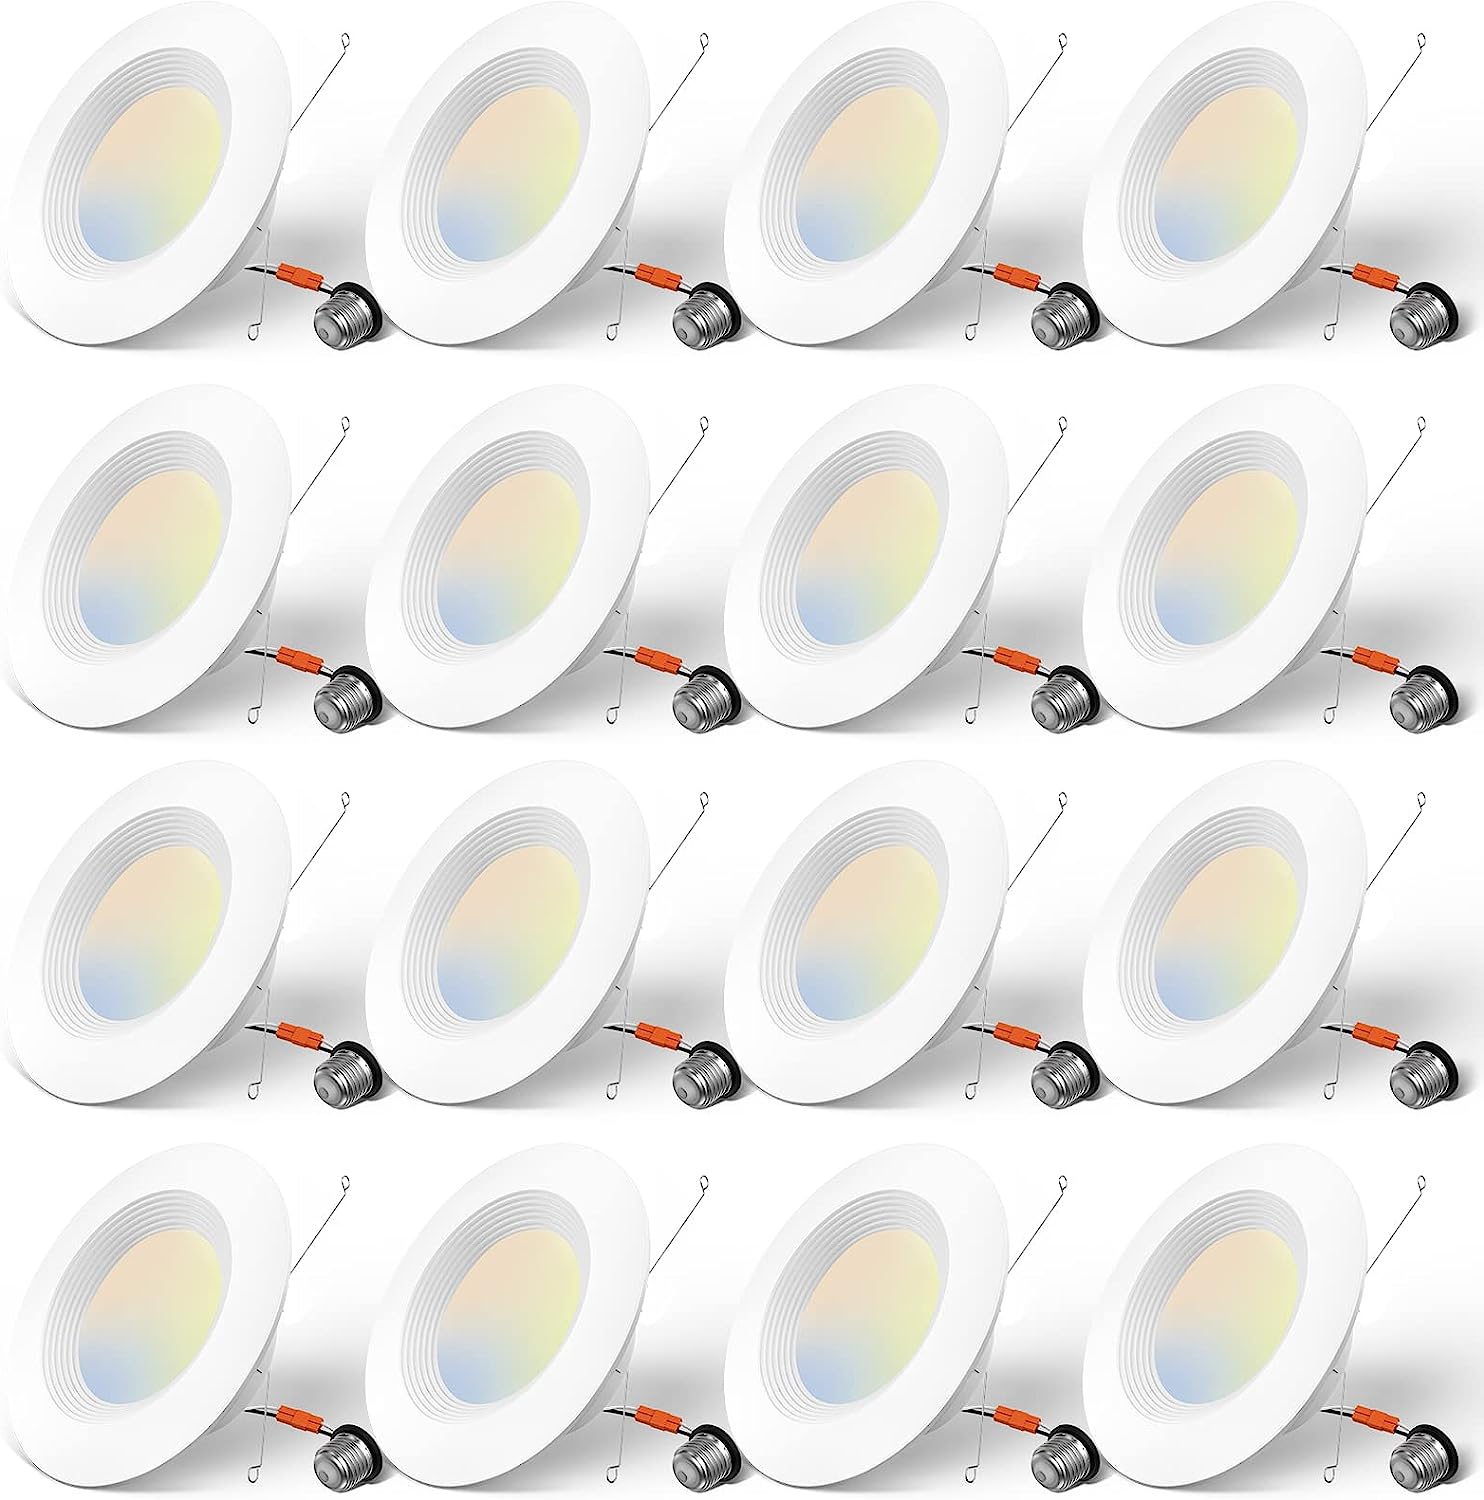 Amico 5/6 inch 5CCT LED Recessed Lighting 16 Pack, [...]